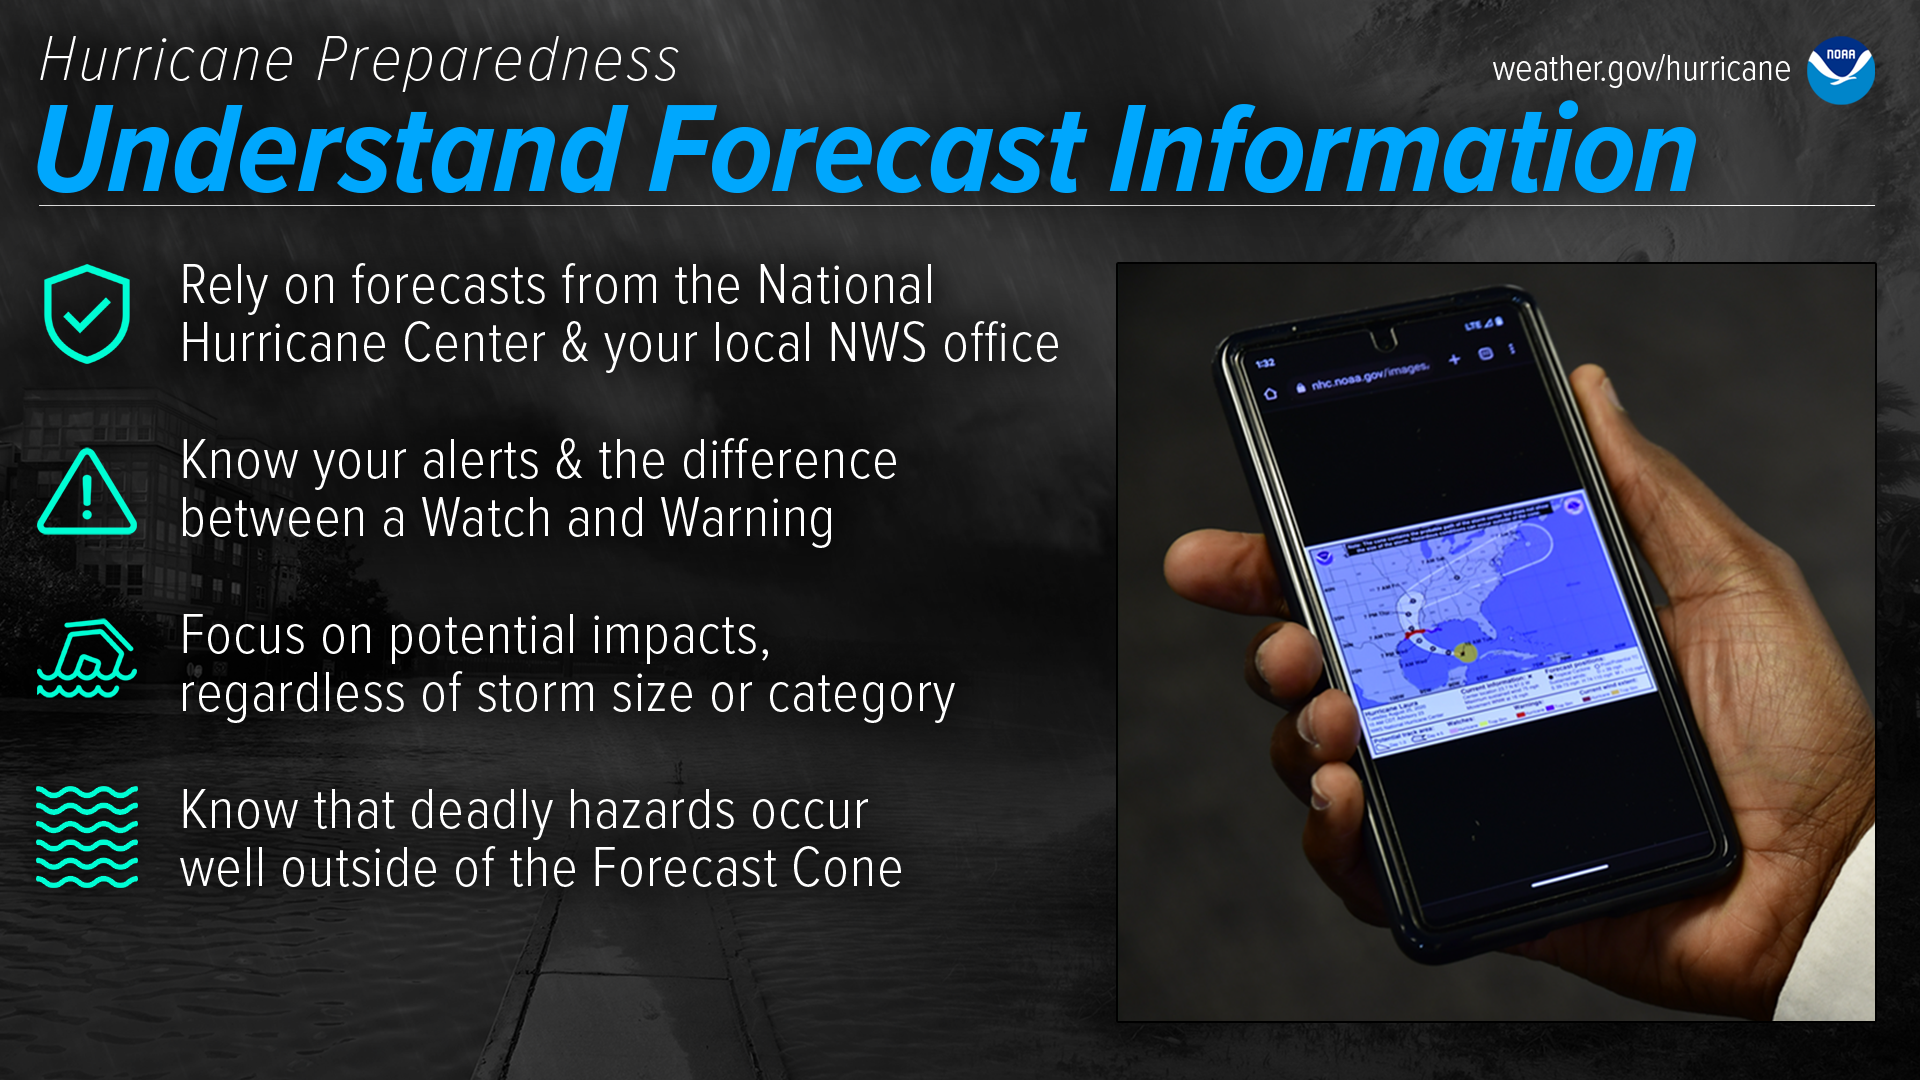 Hurricane Preparedness - Understand forecast information. Rely on forecasts from the National Hurricane Center & your local NWS office. Know your alerts & the difference between a Watch and a Warning. Focus on potential impacts, regardless of storm size or category. Know that deadly hazards occur well outside of the Forecast Cone.